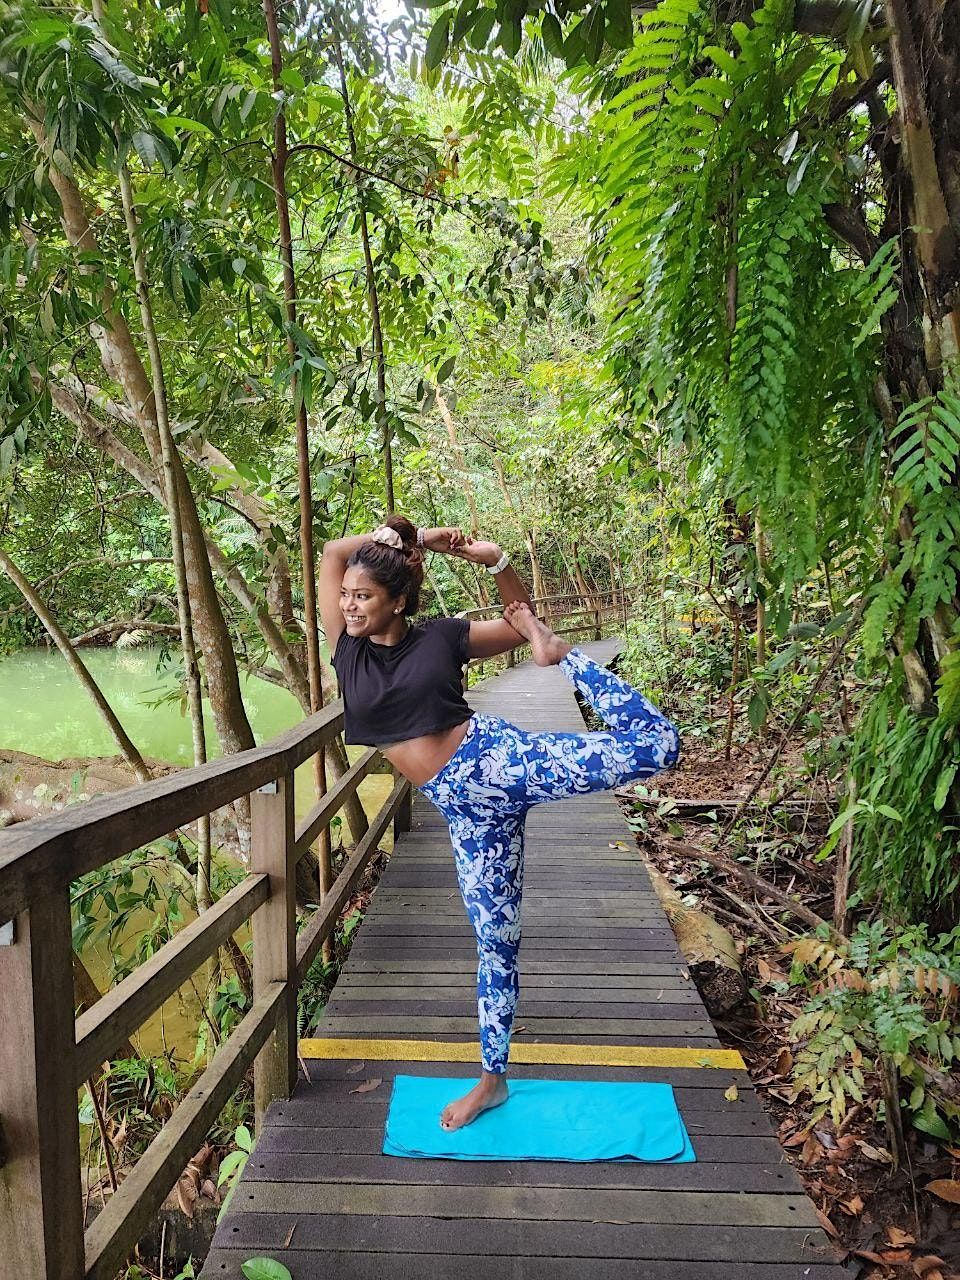 Pay What You Wish Yoga: Get Twisted with Nathiya